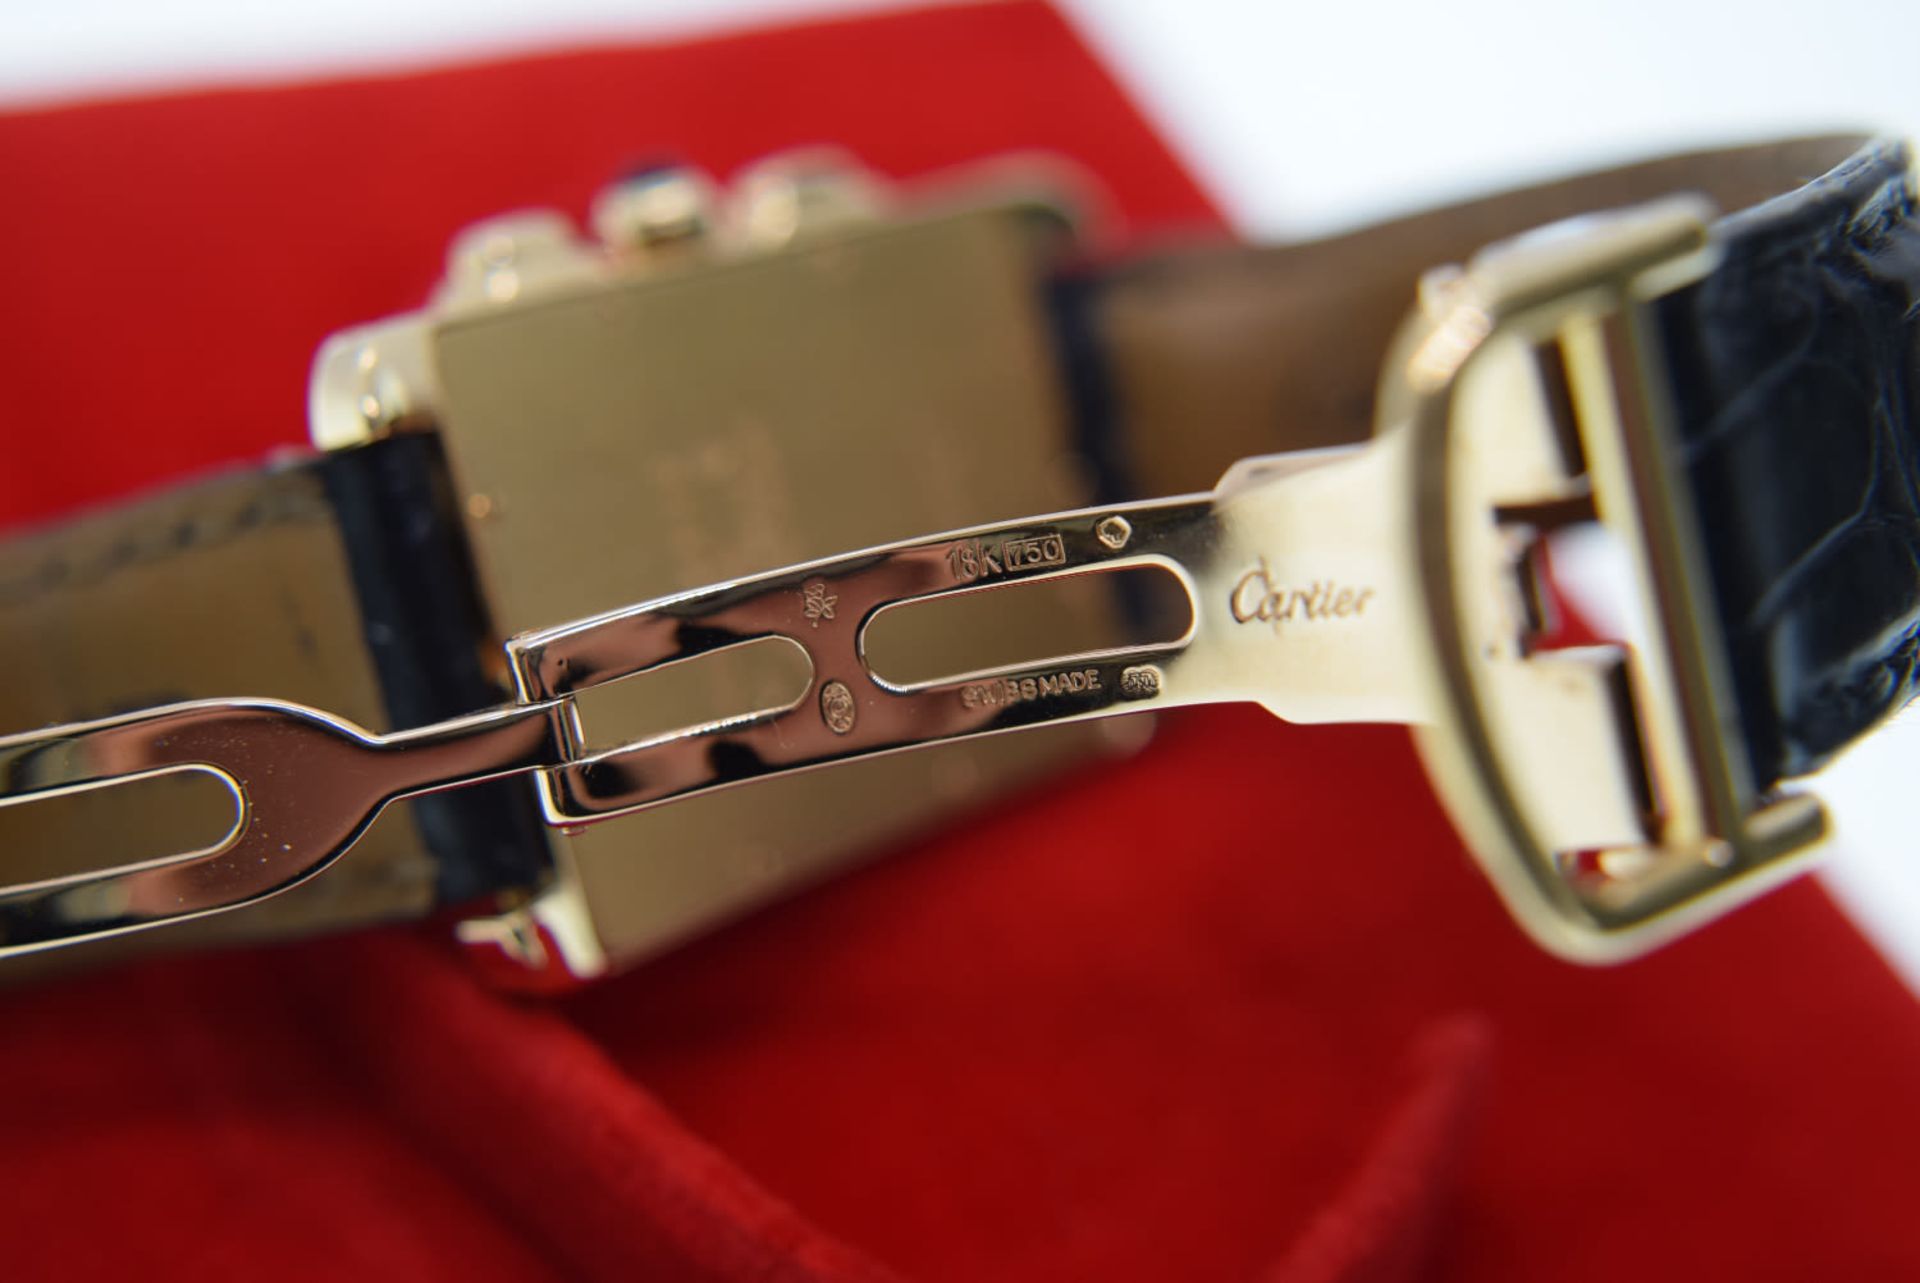 18K GOLD CARTIER TANK AMERICAINE REF. 1730 ON BLACK LEATHER WITH CARTIER SIGNED CLASP - Image 4 of 8